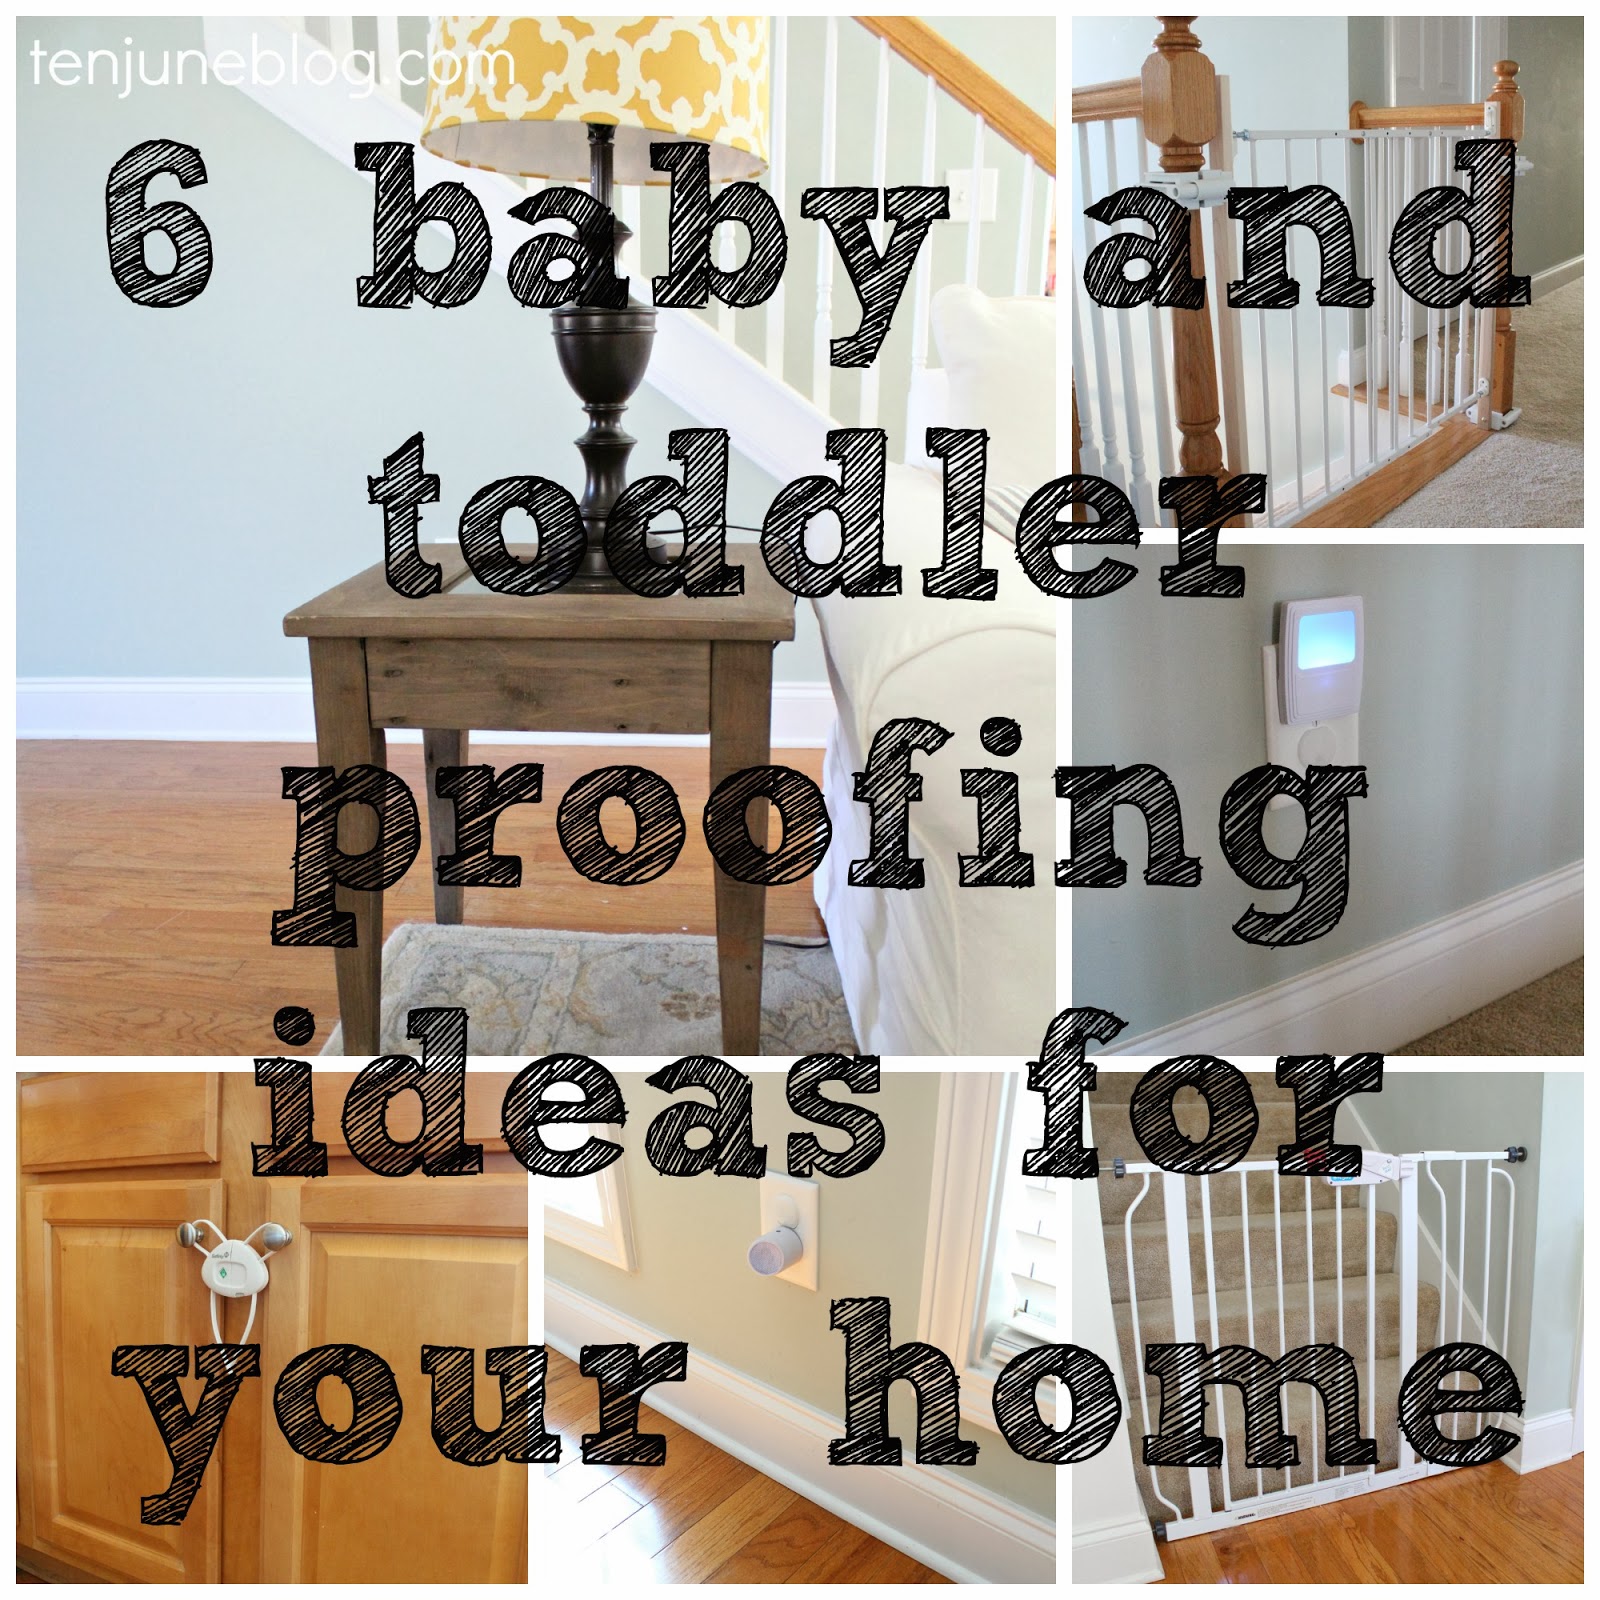 Toddler/Baby Proofing Tips! DIY ideas! 